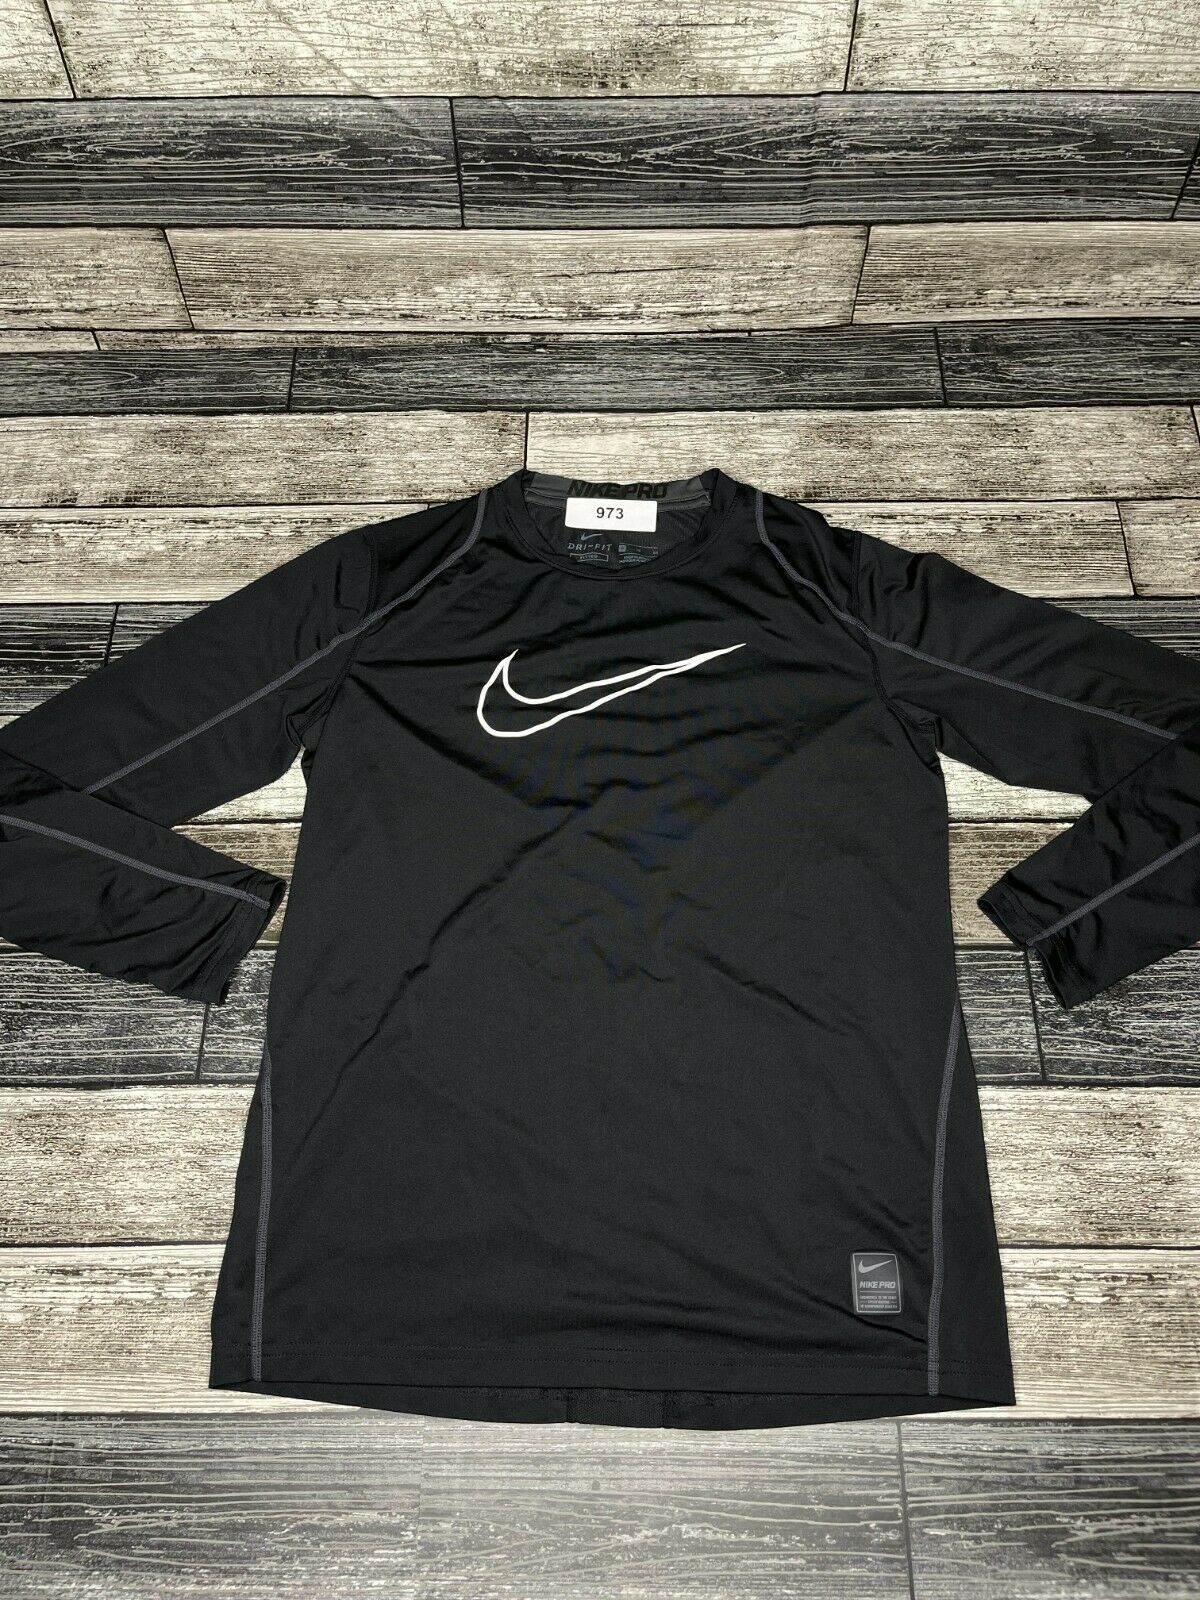 Nike Pro Combat Fitted Long Sleeve Shirt Youth Boys Xl Black Pullover Dri-fit